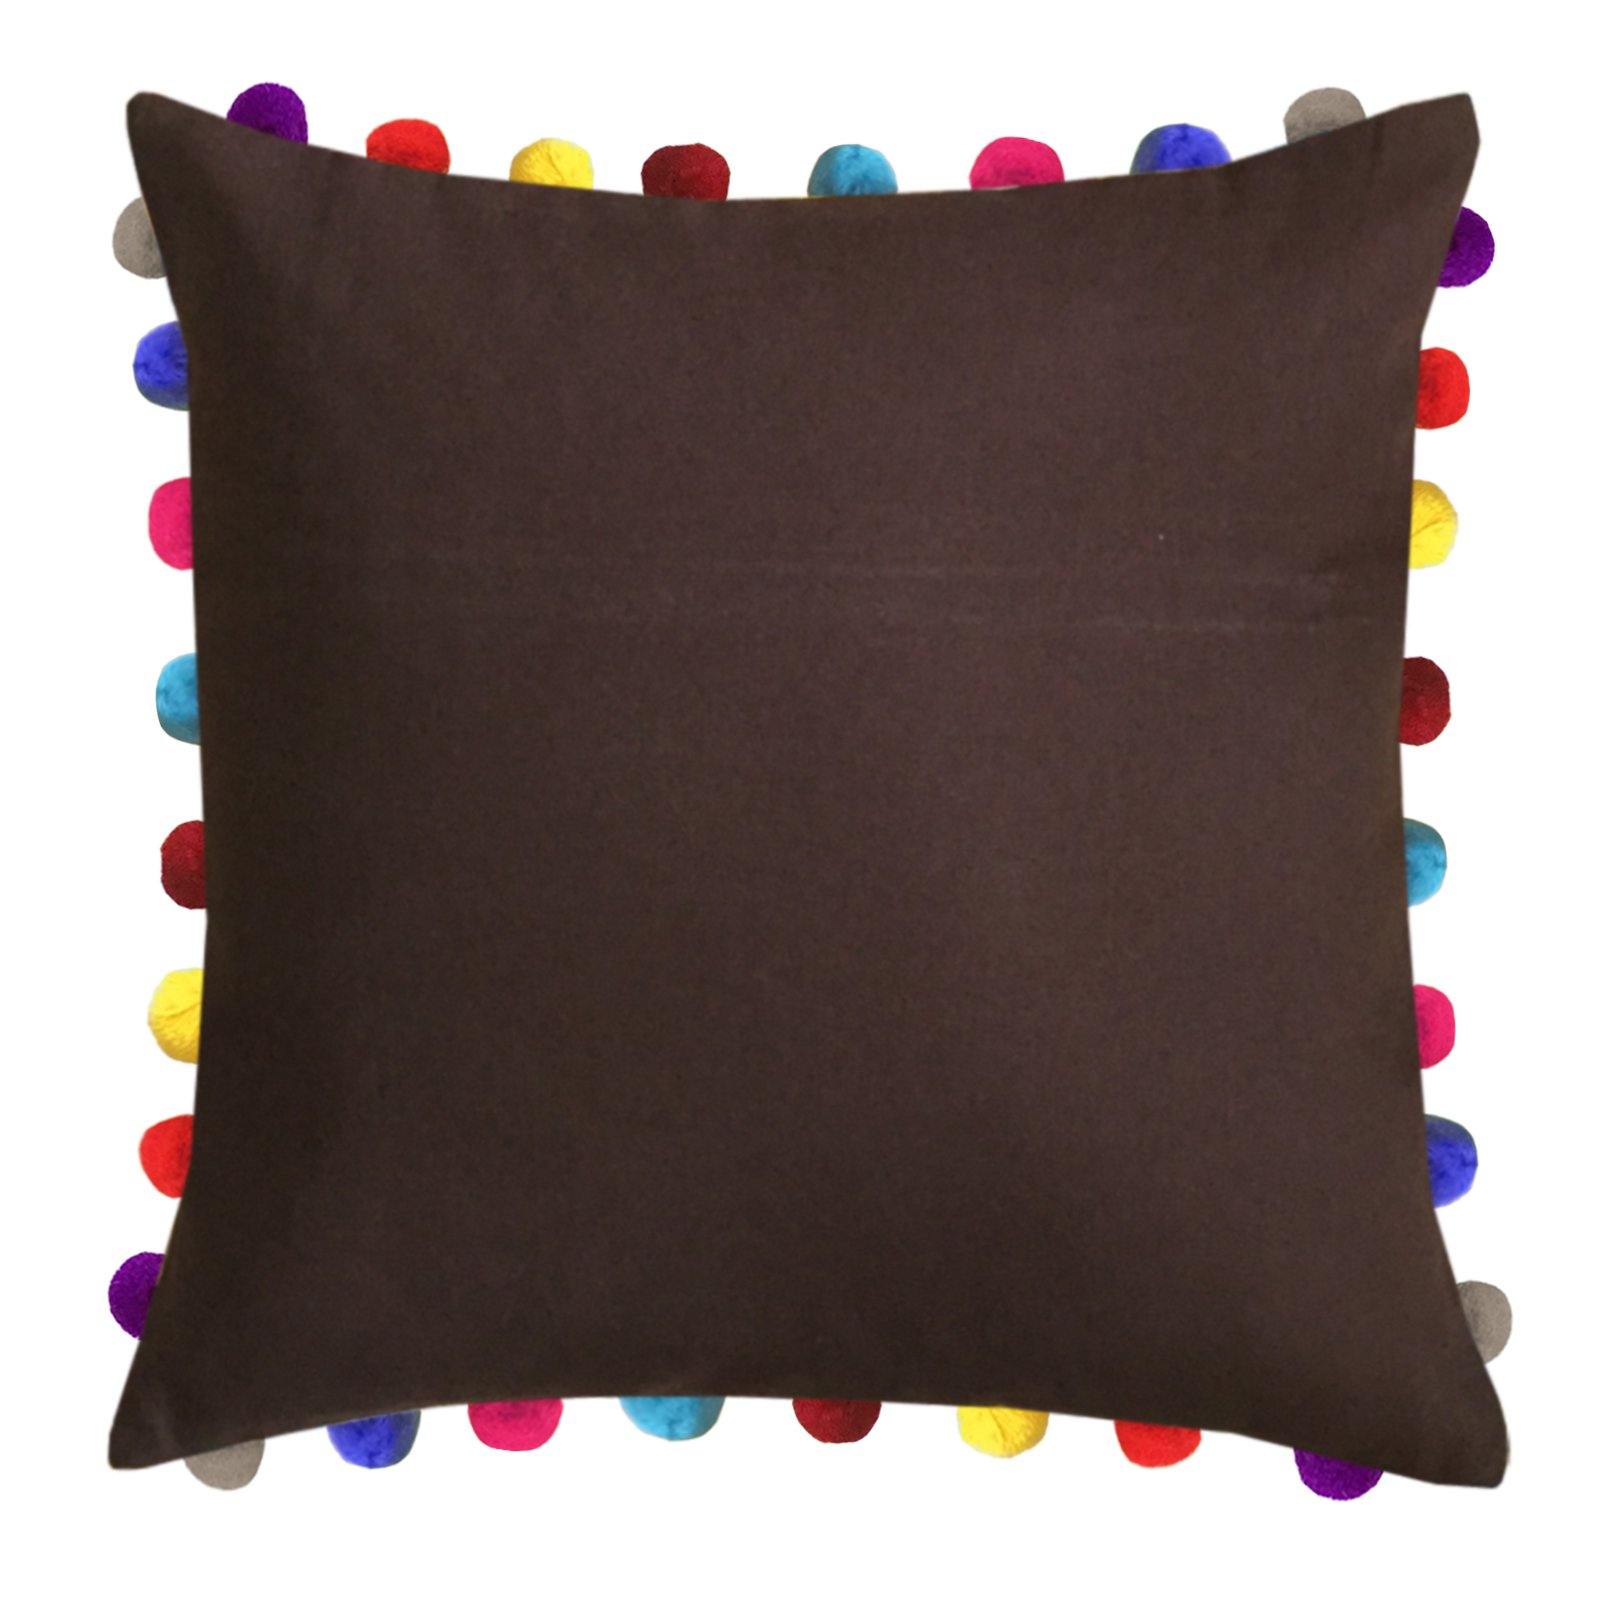 Lushomes French Roast Cushion Cover with Colorful Pom poms (Single pc, 24 x 24”) - Lushomes